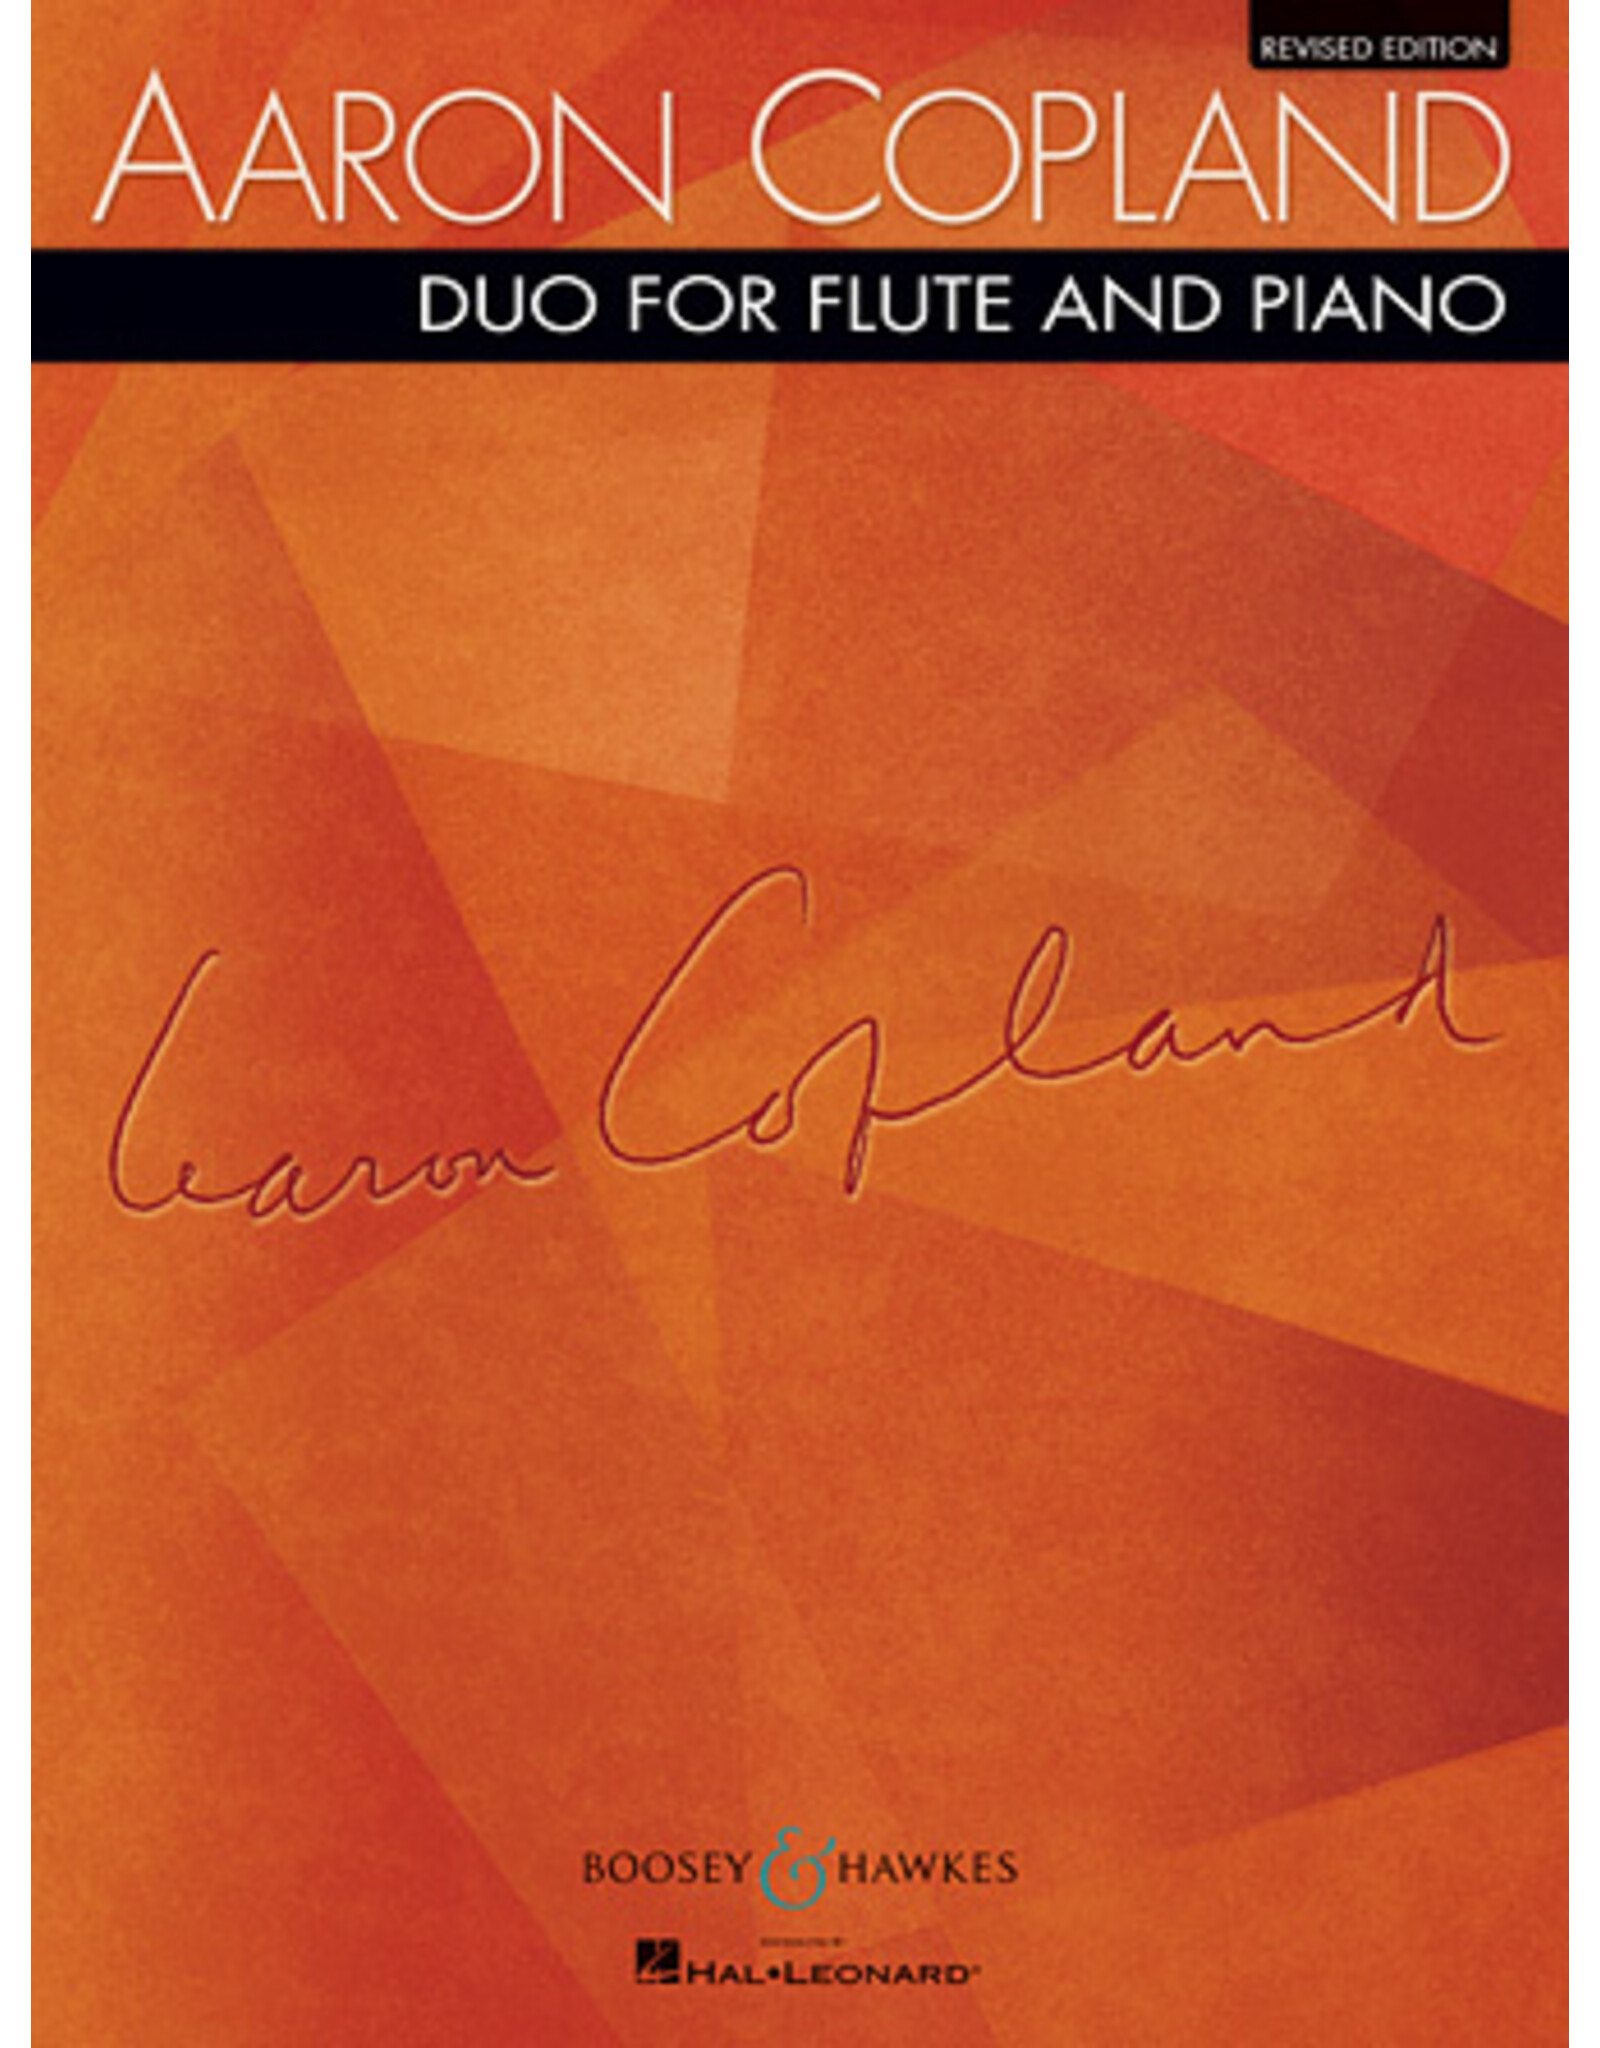 Boosey & Hawkes Copland - Duo for Flute and Piano Revised Edition Softcover